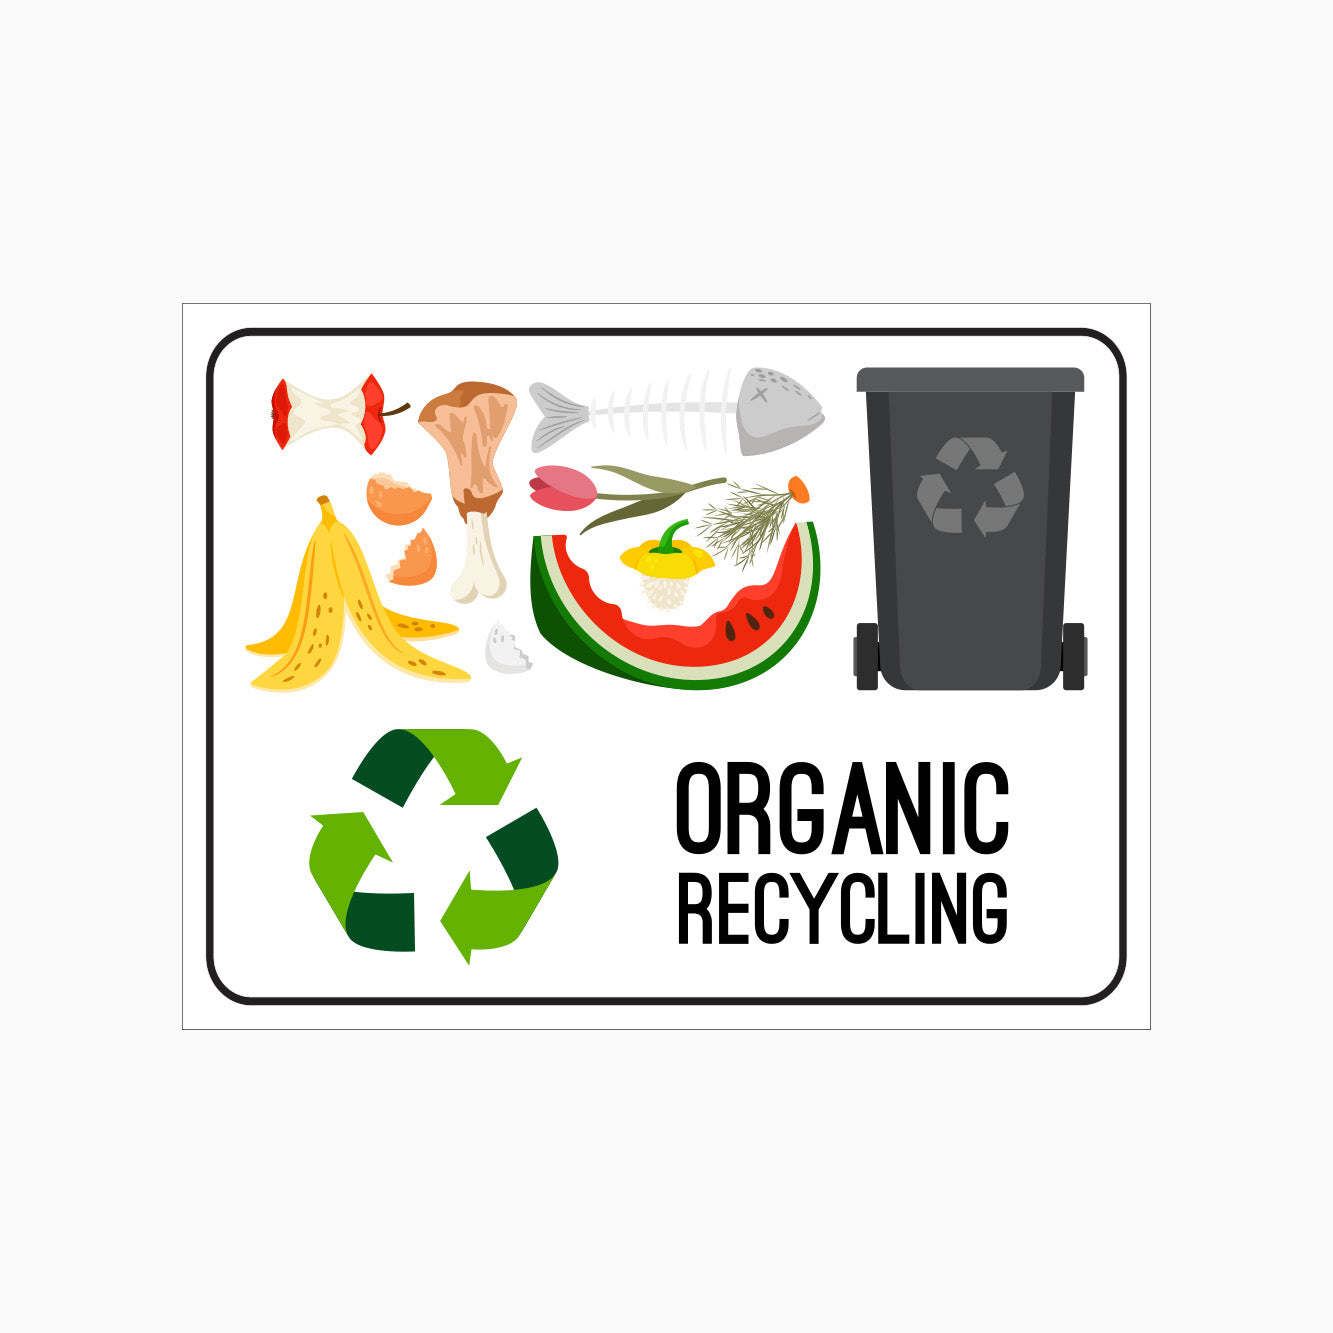 ORGANIC RECYCLING SIGN - Recycling Signs FROM GET SIGNS